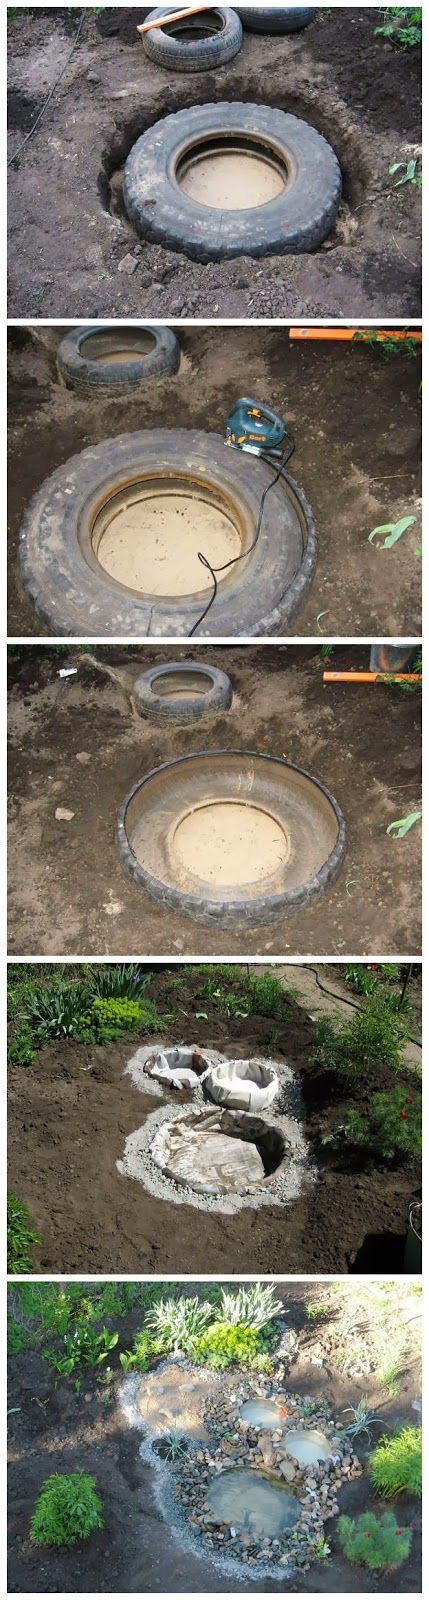 Recycled Tires Pond – you could make it look like a T-rex foot print if you have